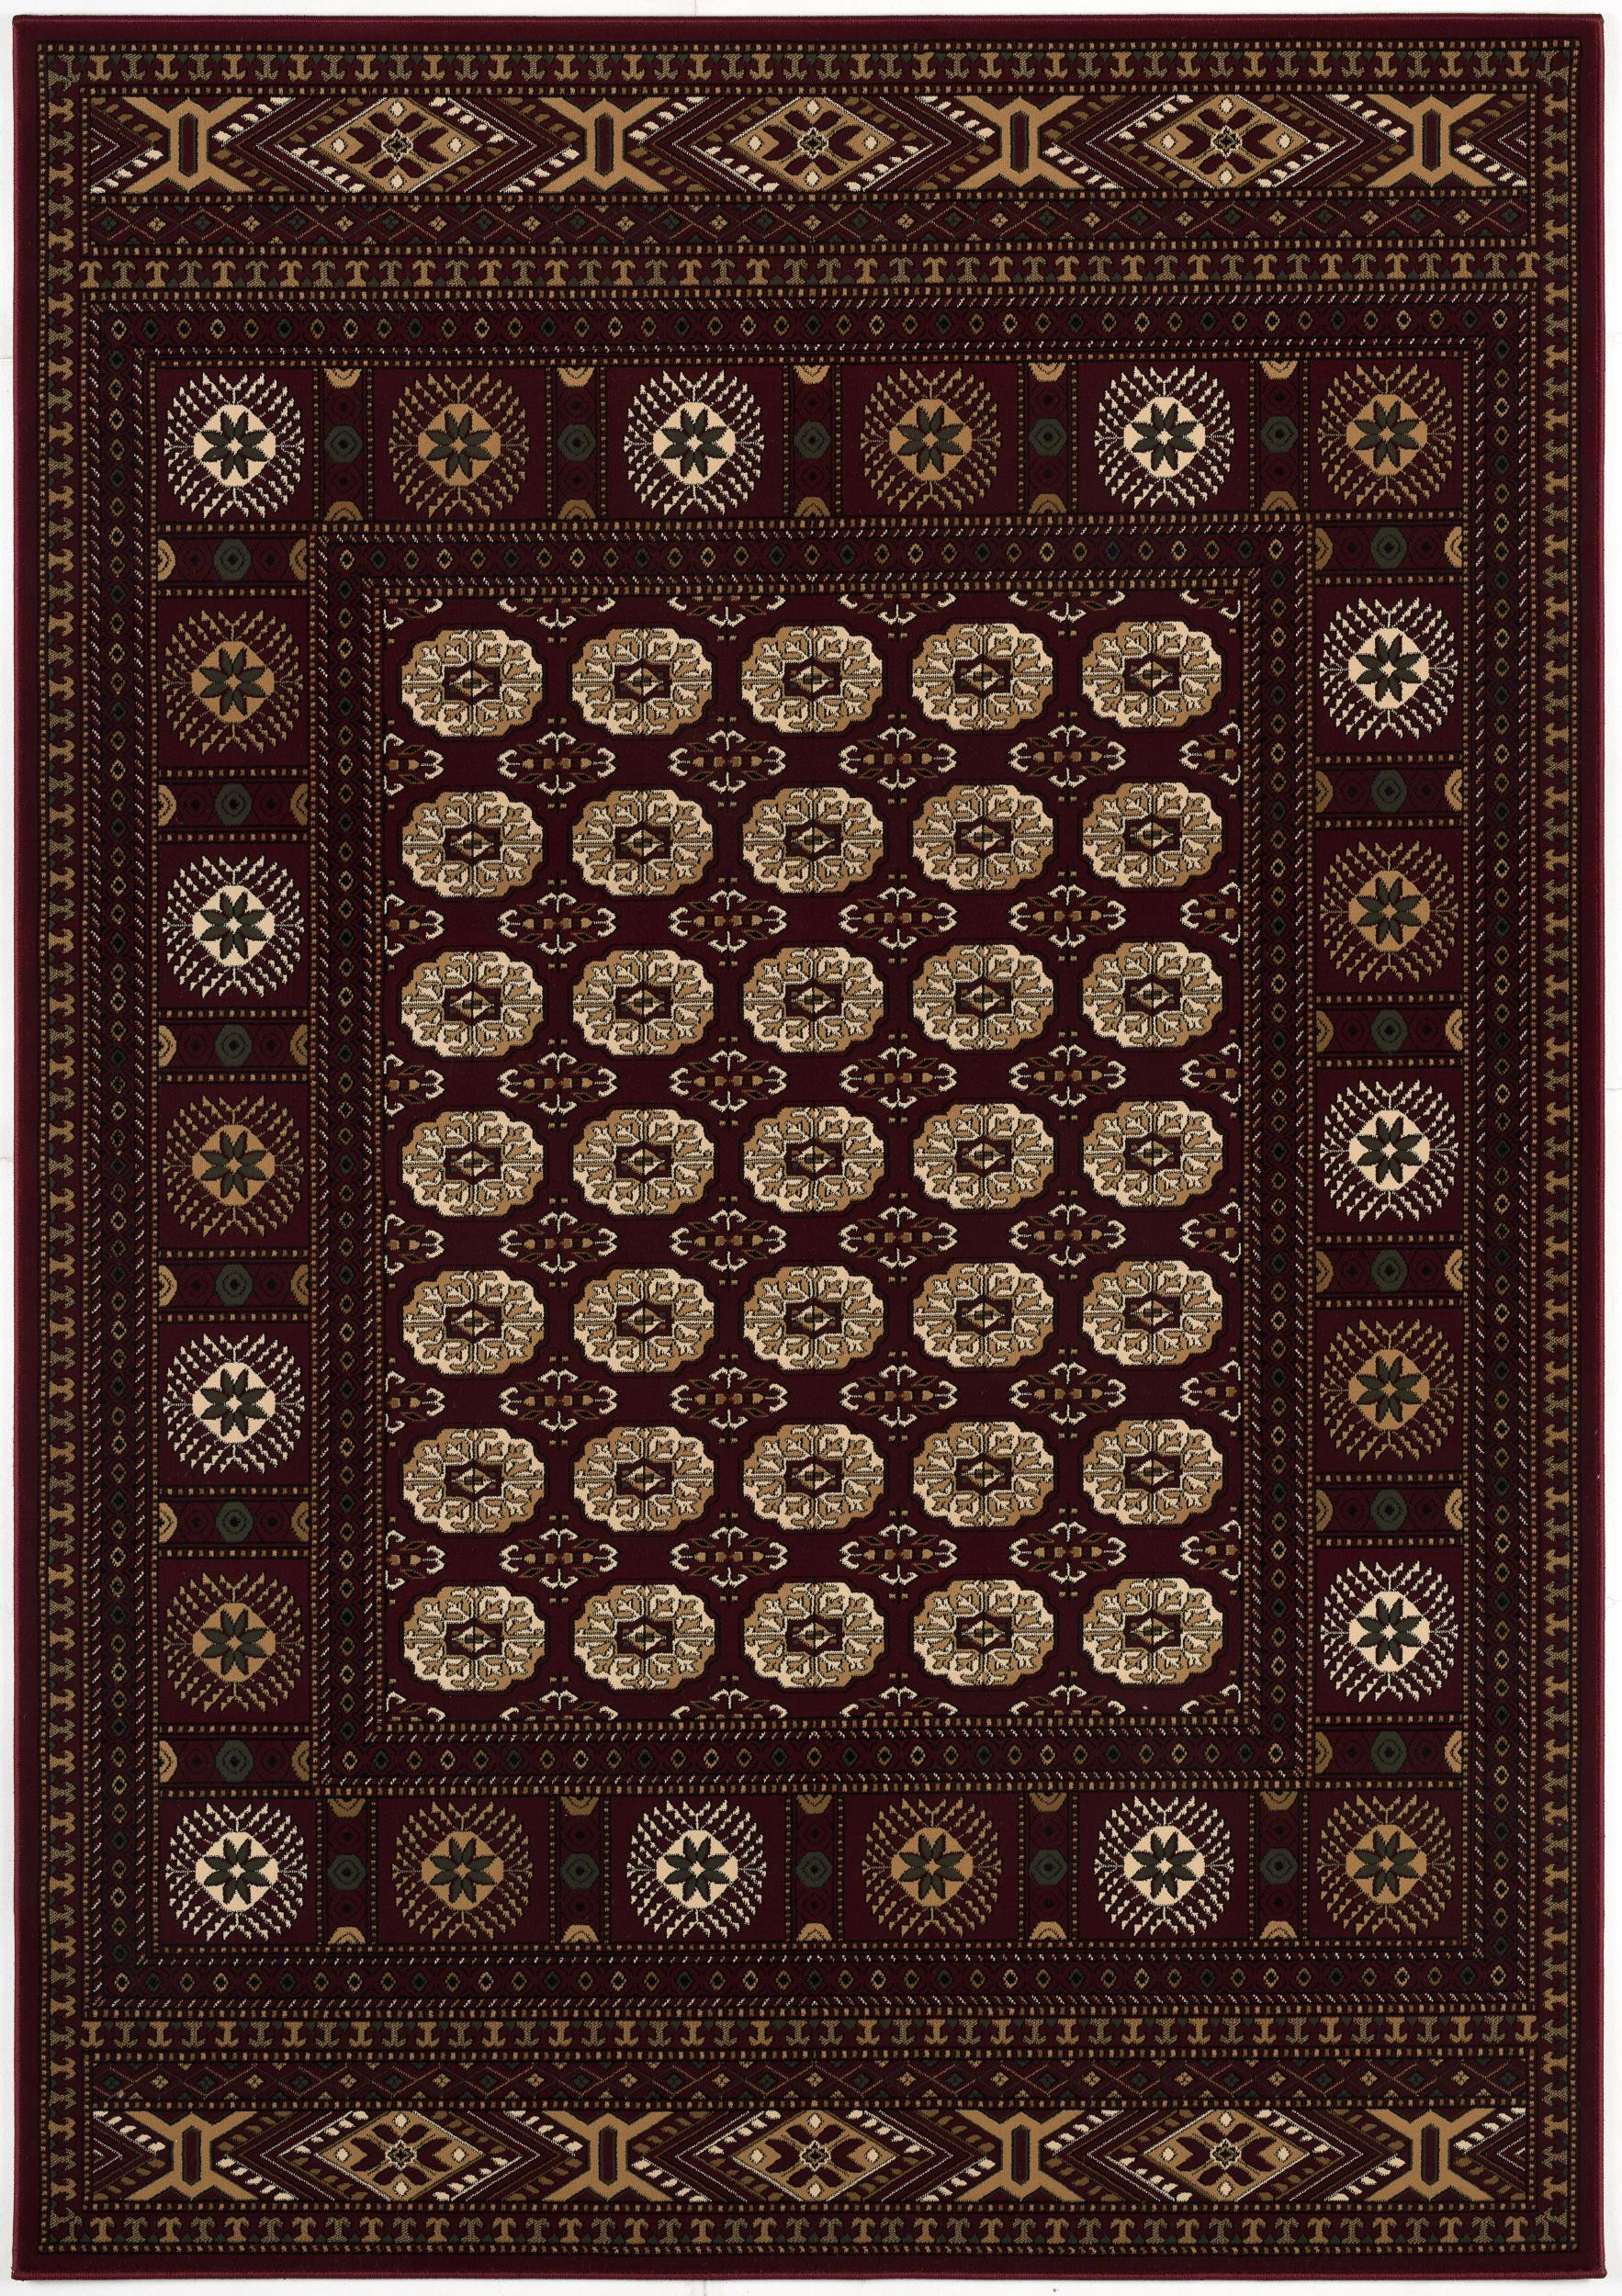 8’ x 11’ Red Eclectic Geometric Pattern Area Rug-395473-1